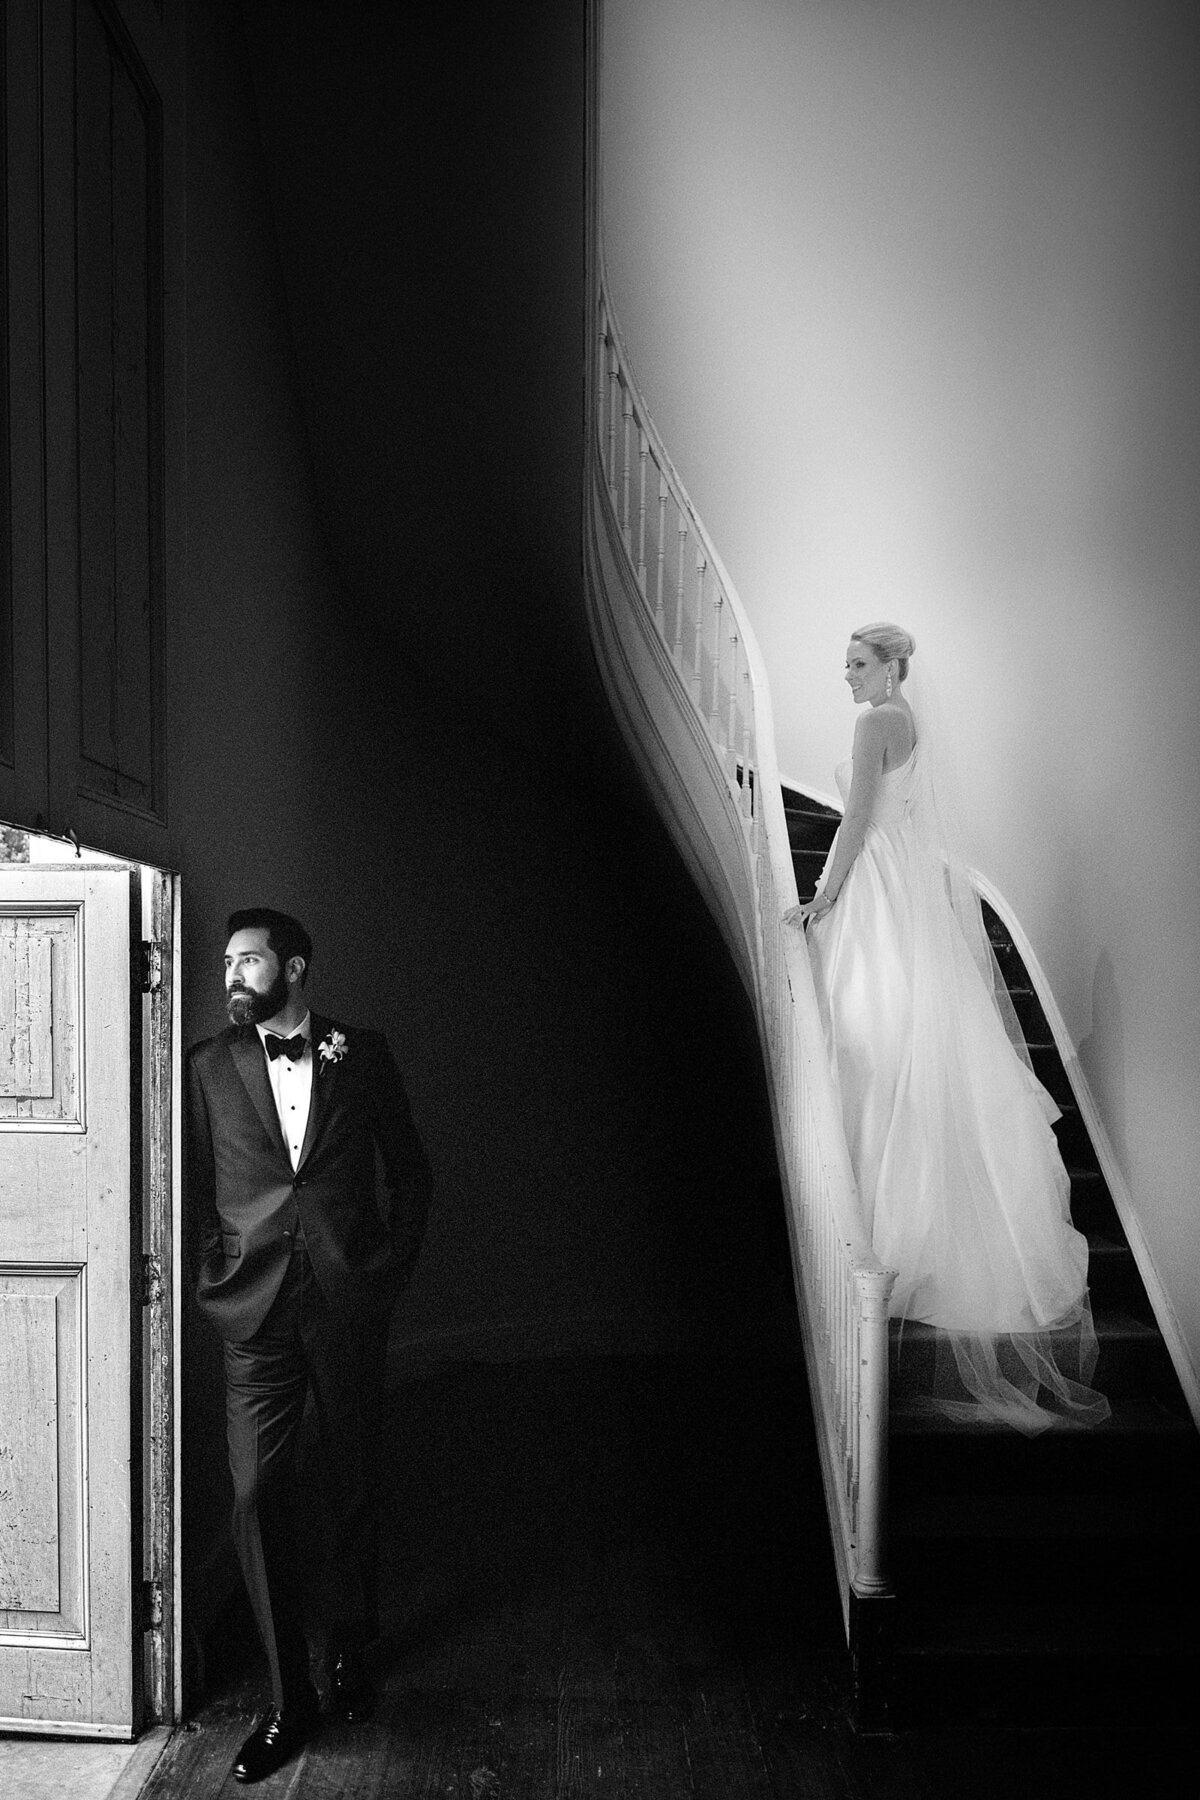 A bride walking up the stairs while looking at her groom standing at the bottom.